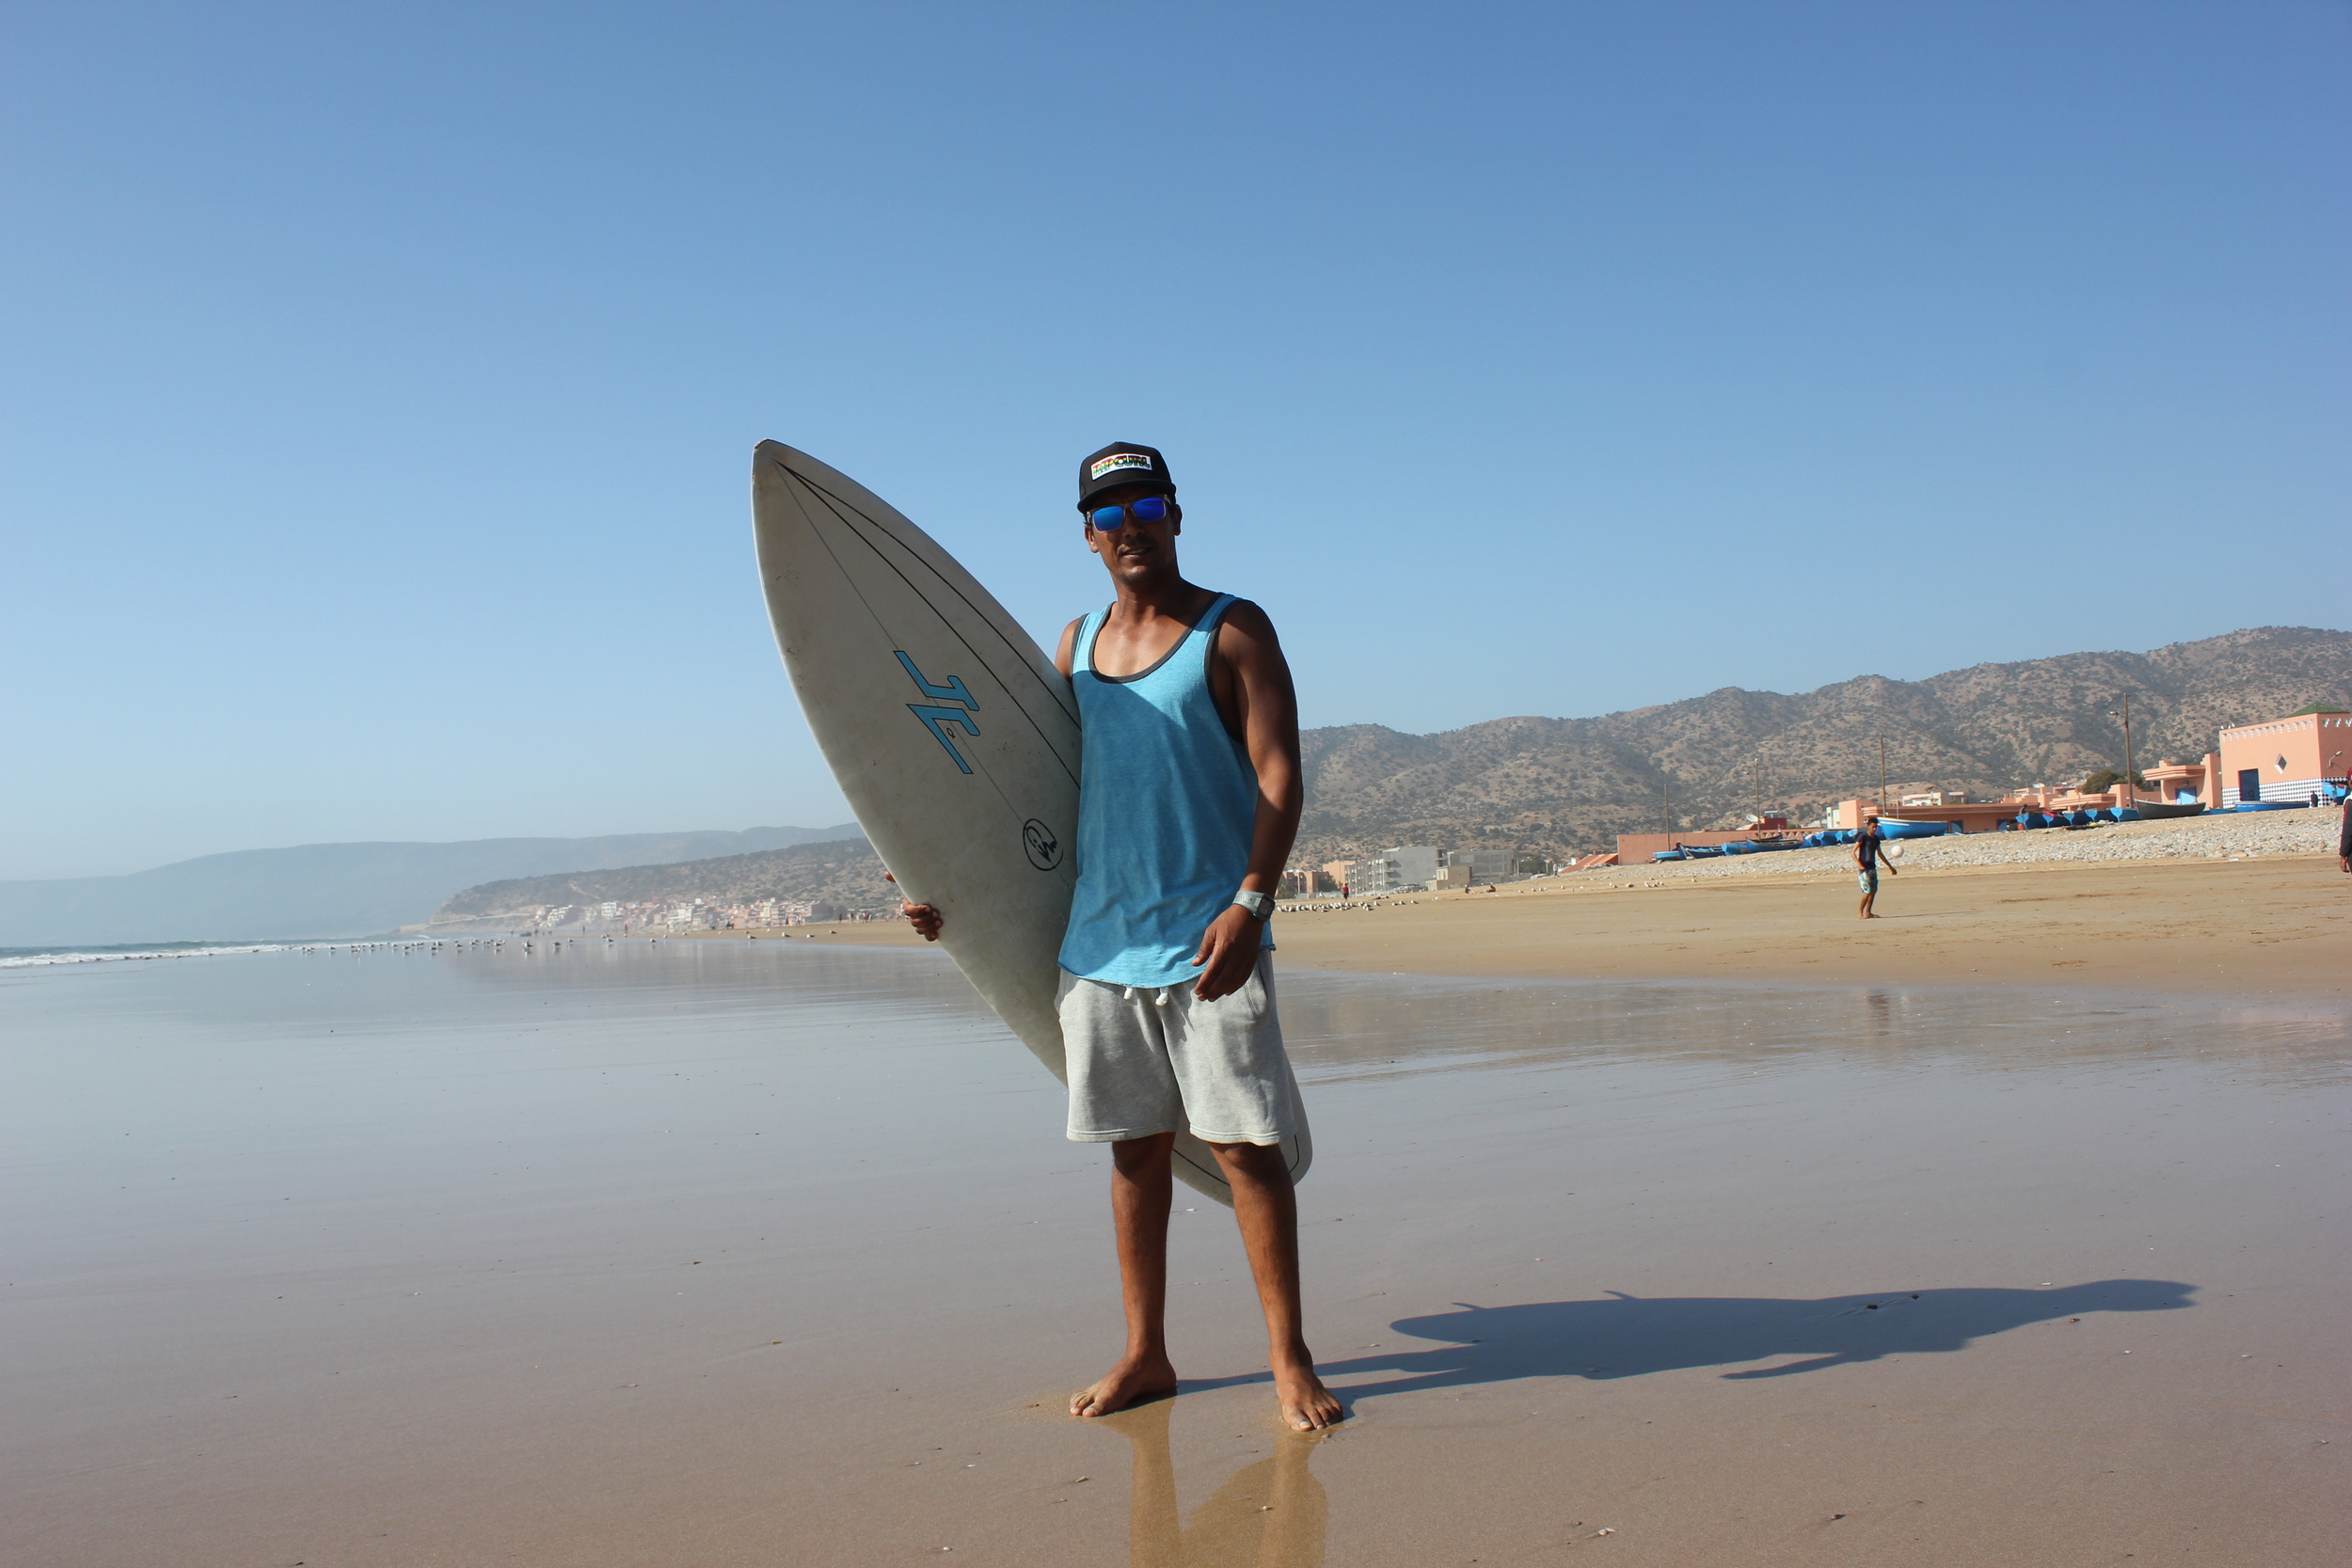 Simmo, one of the surf instructors